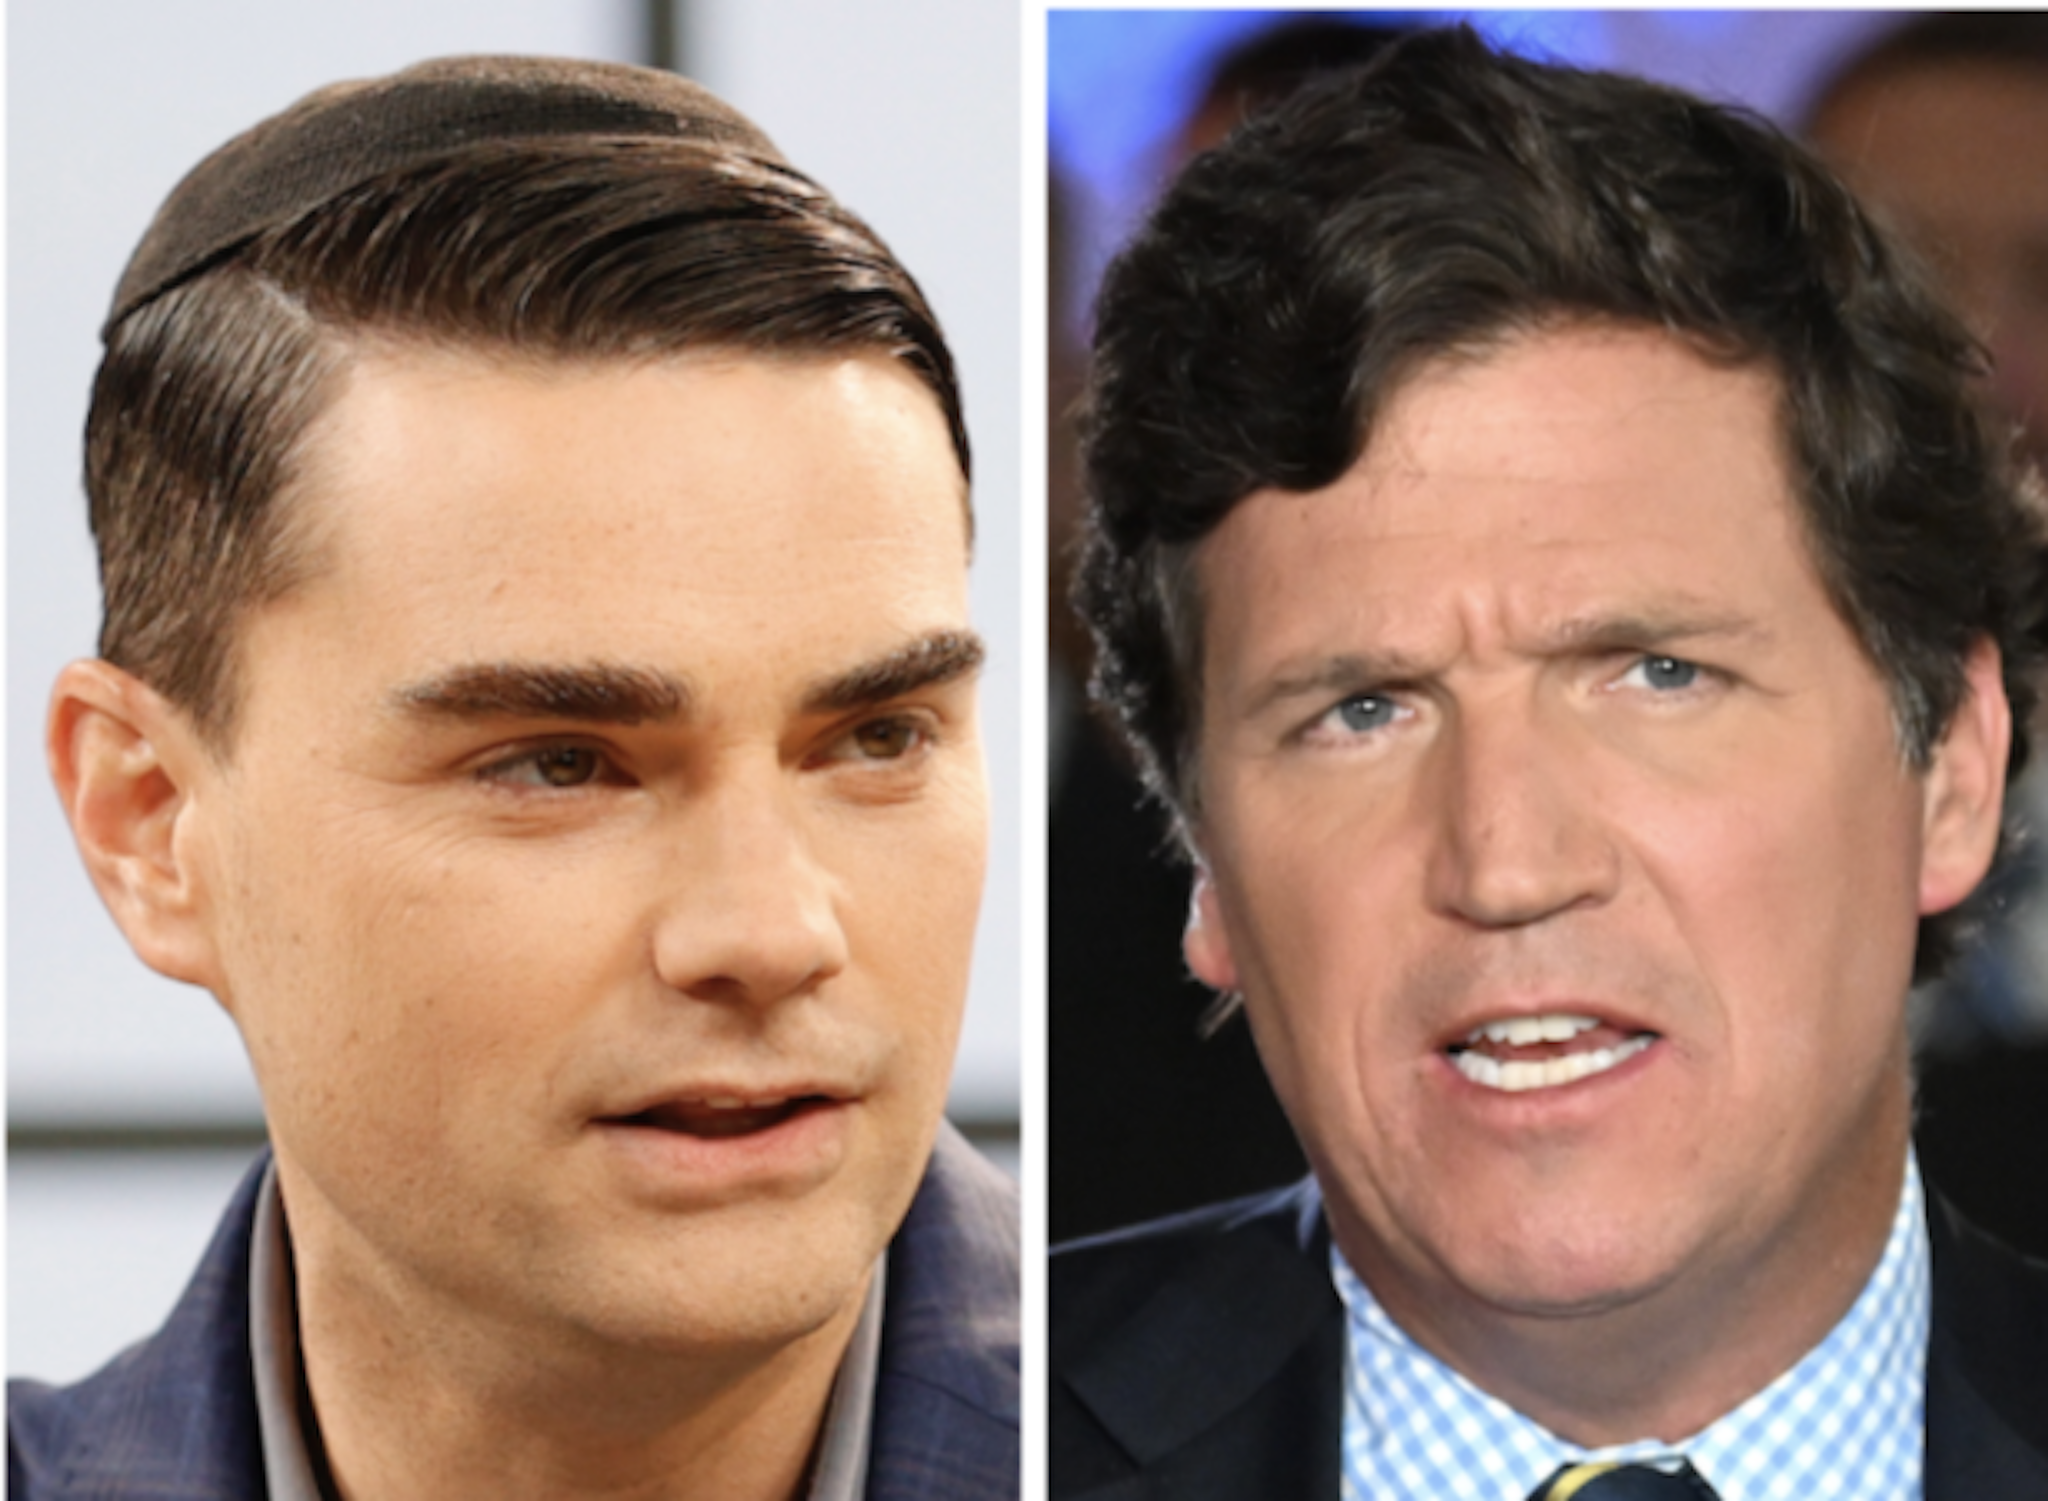 Democrats and the liberal media are out to cancel Tucker Carlson after the Fox News host aired previously unseen footage of the January 6 Capitol riot, Ben Shapiro said Wednesday.